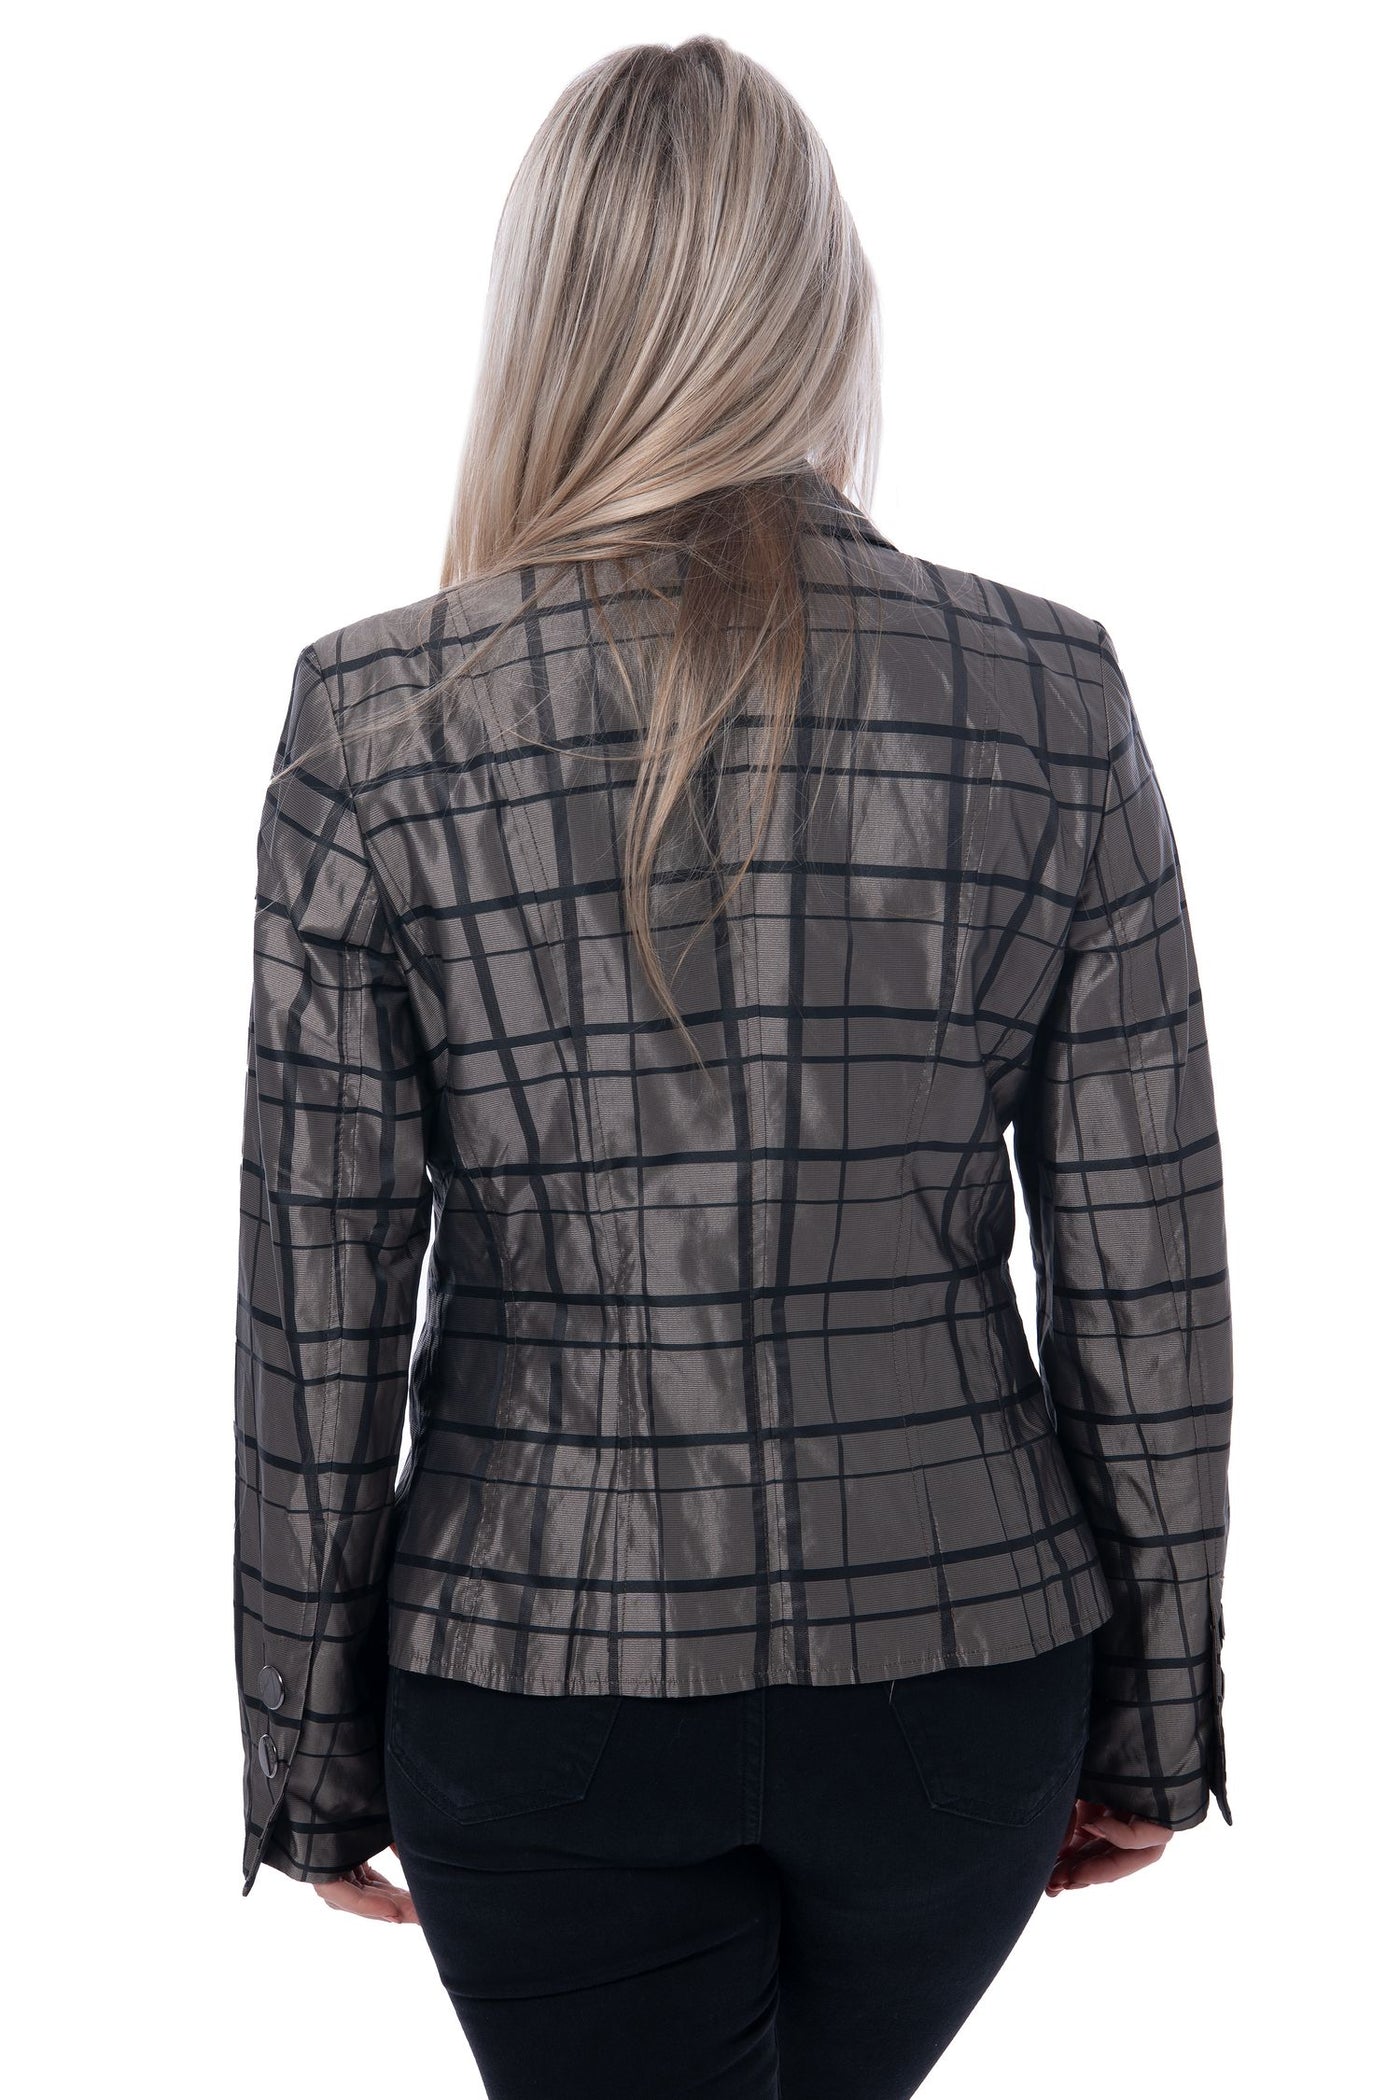 Airfield brown and black chequered jacket